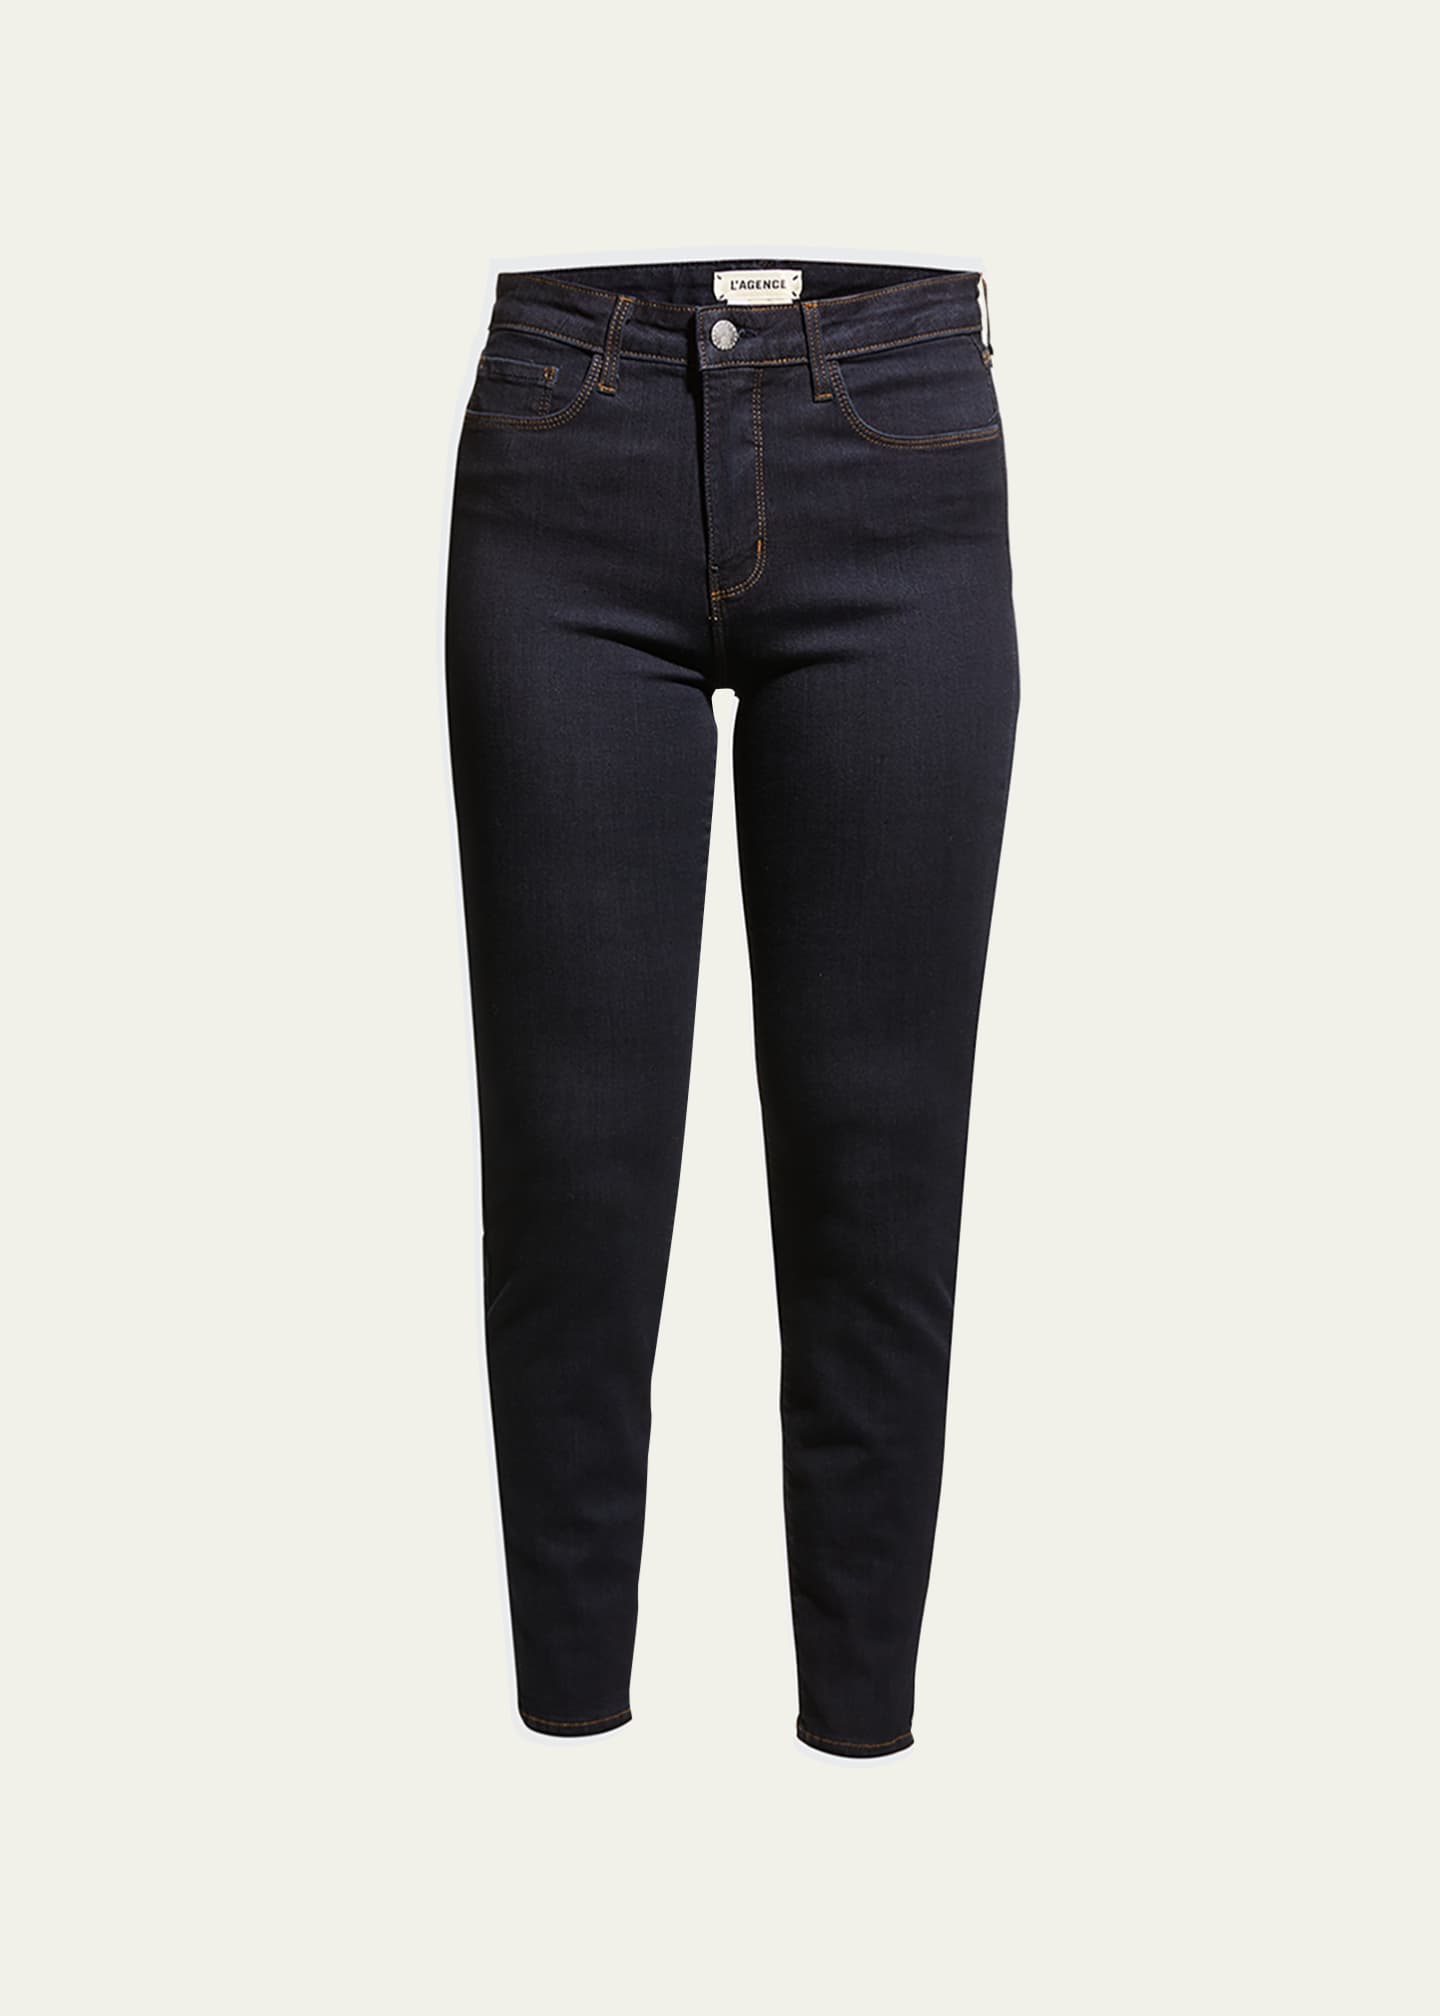 L'Agence Margot High-Rise Skinny Ankle Jeans Image 1 of 5